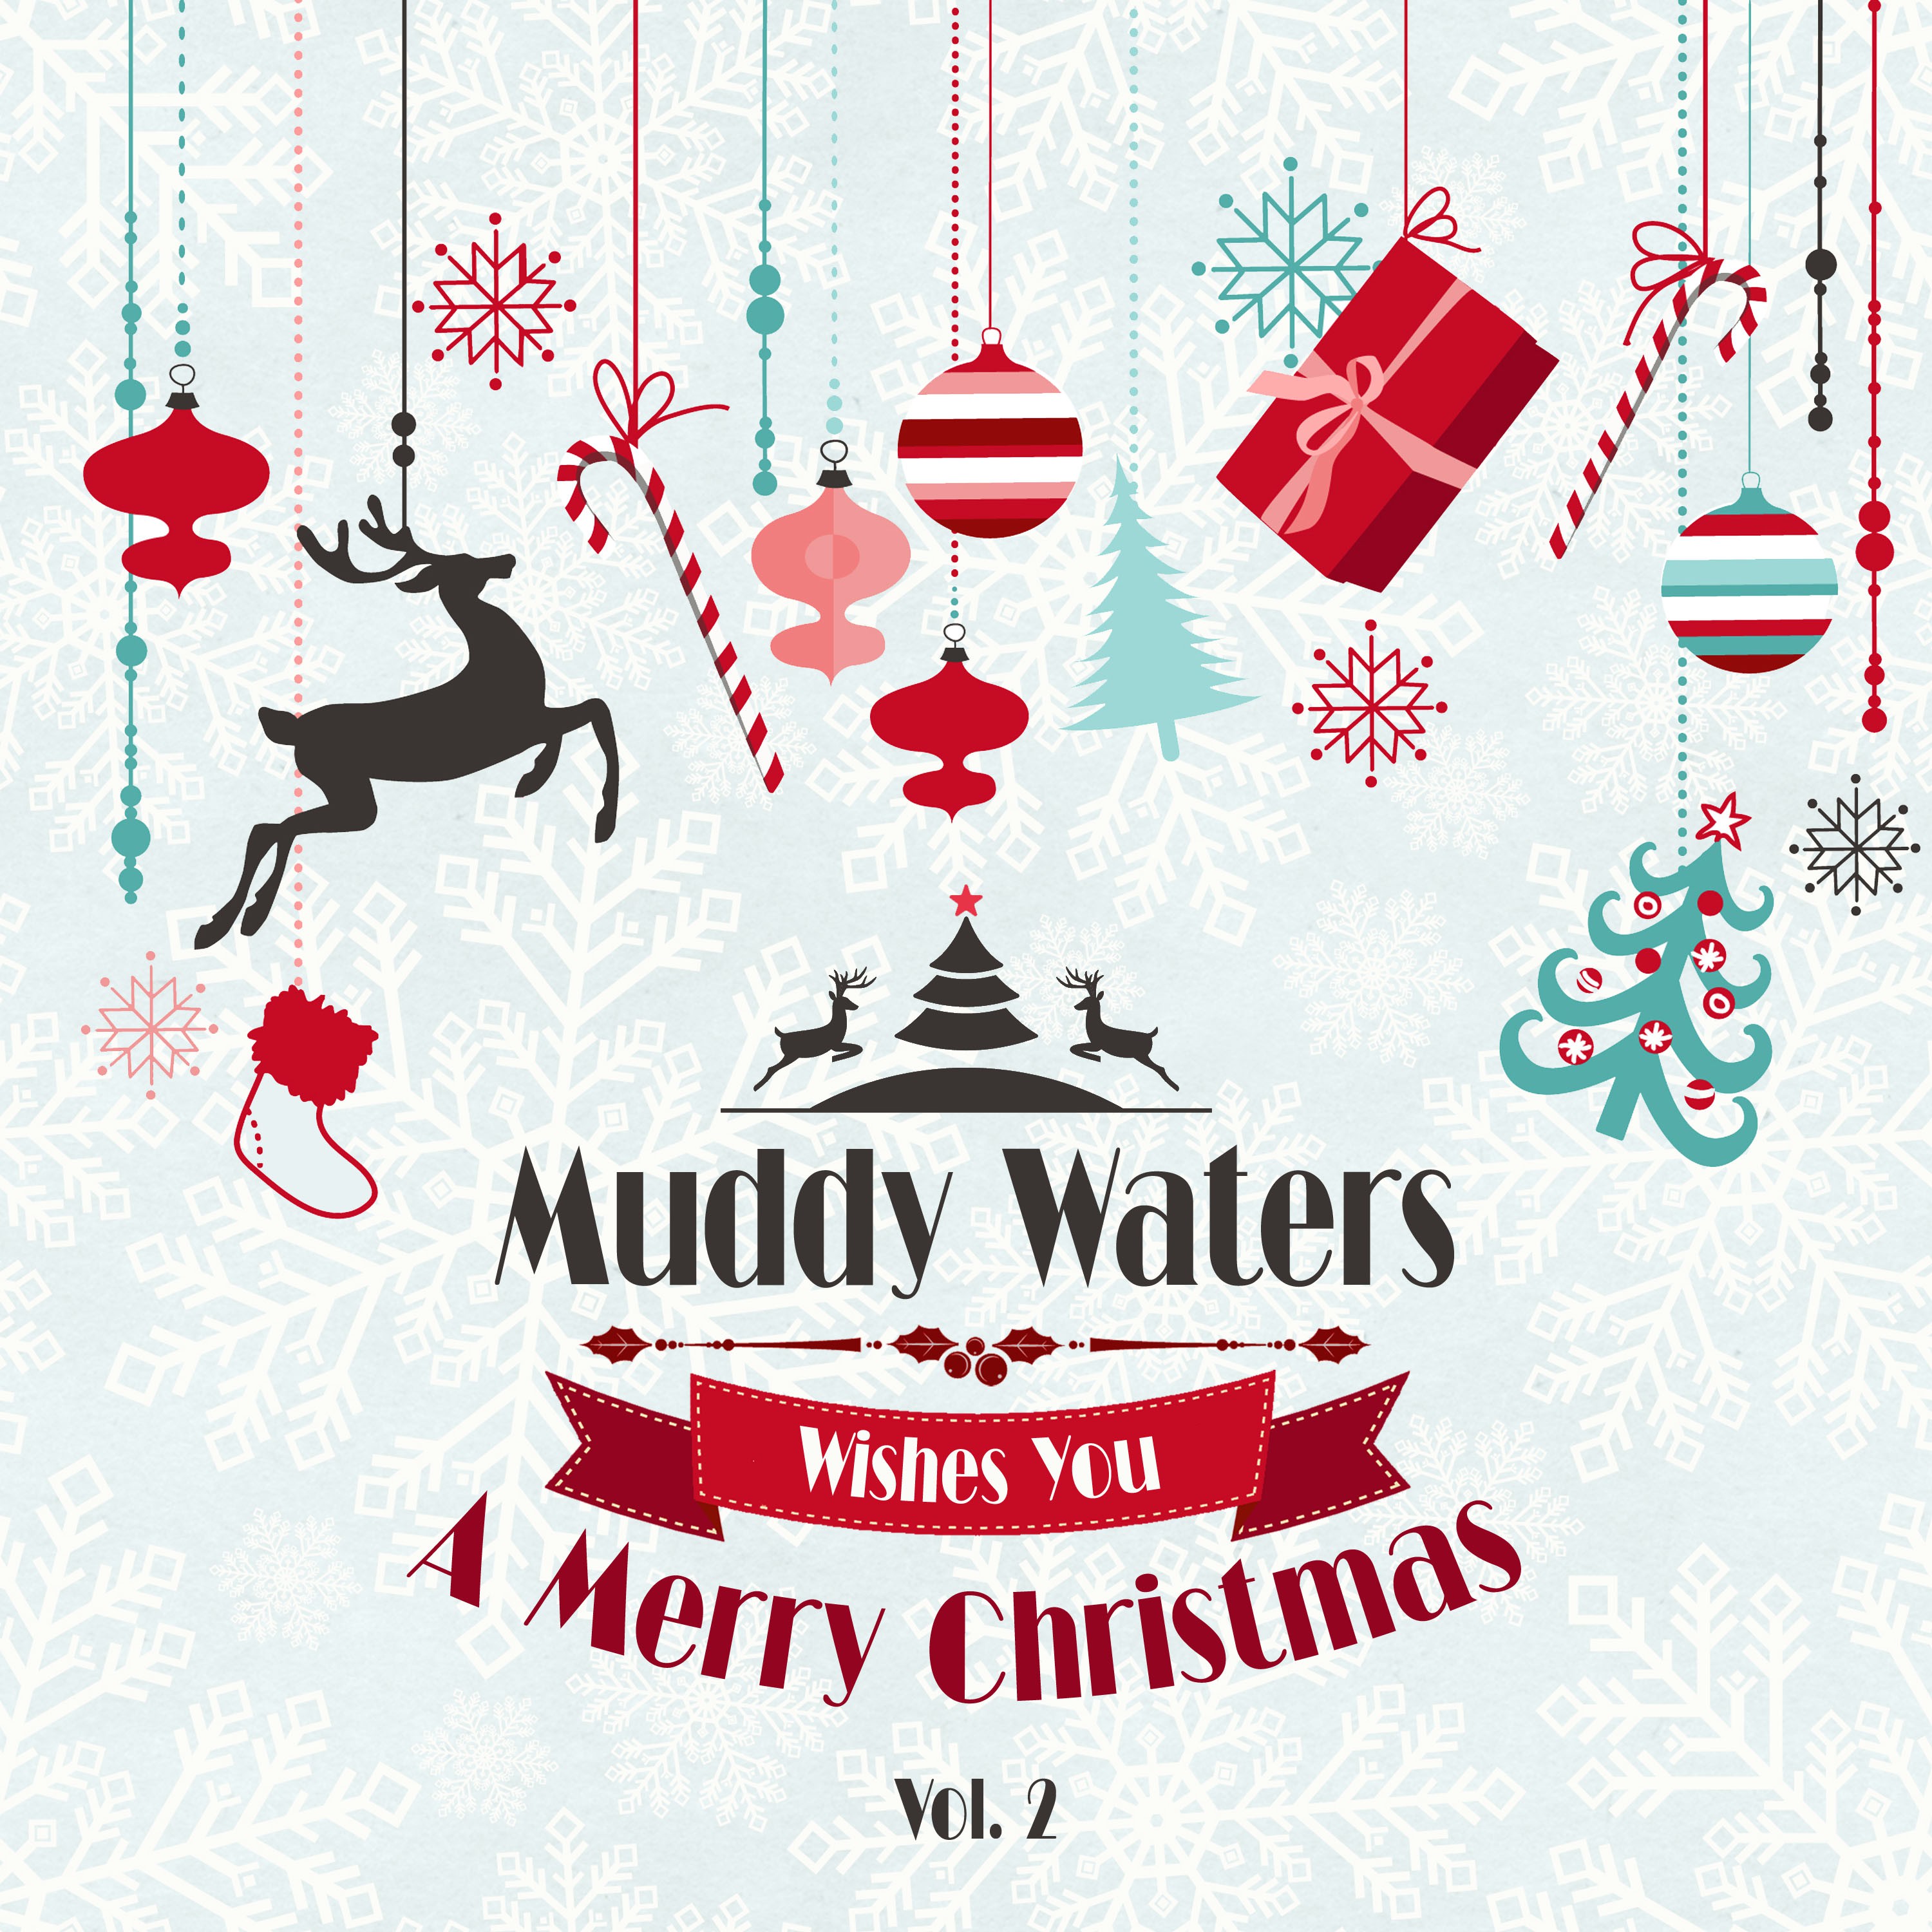 Muddy Waters Wishes You a Merry Christmas, Vol. 2